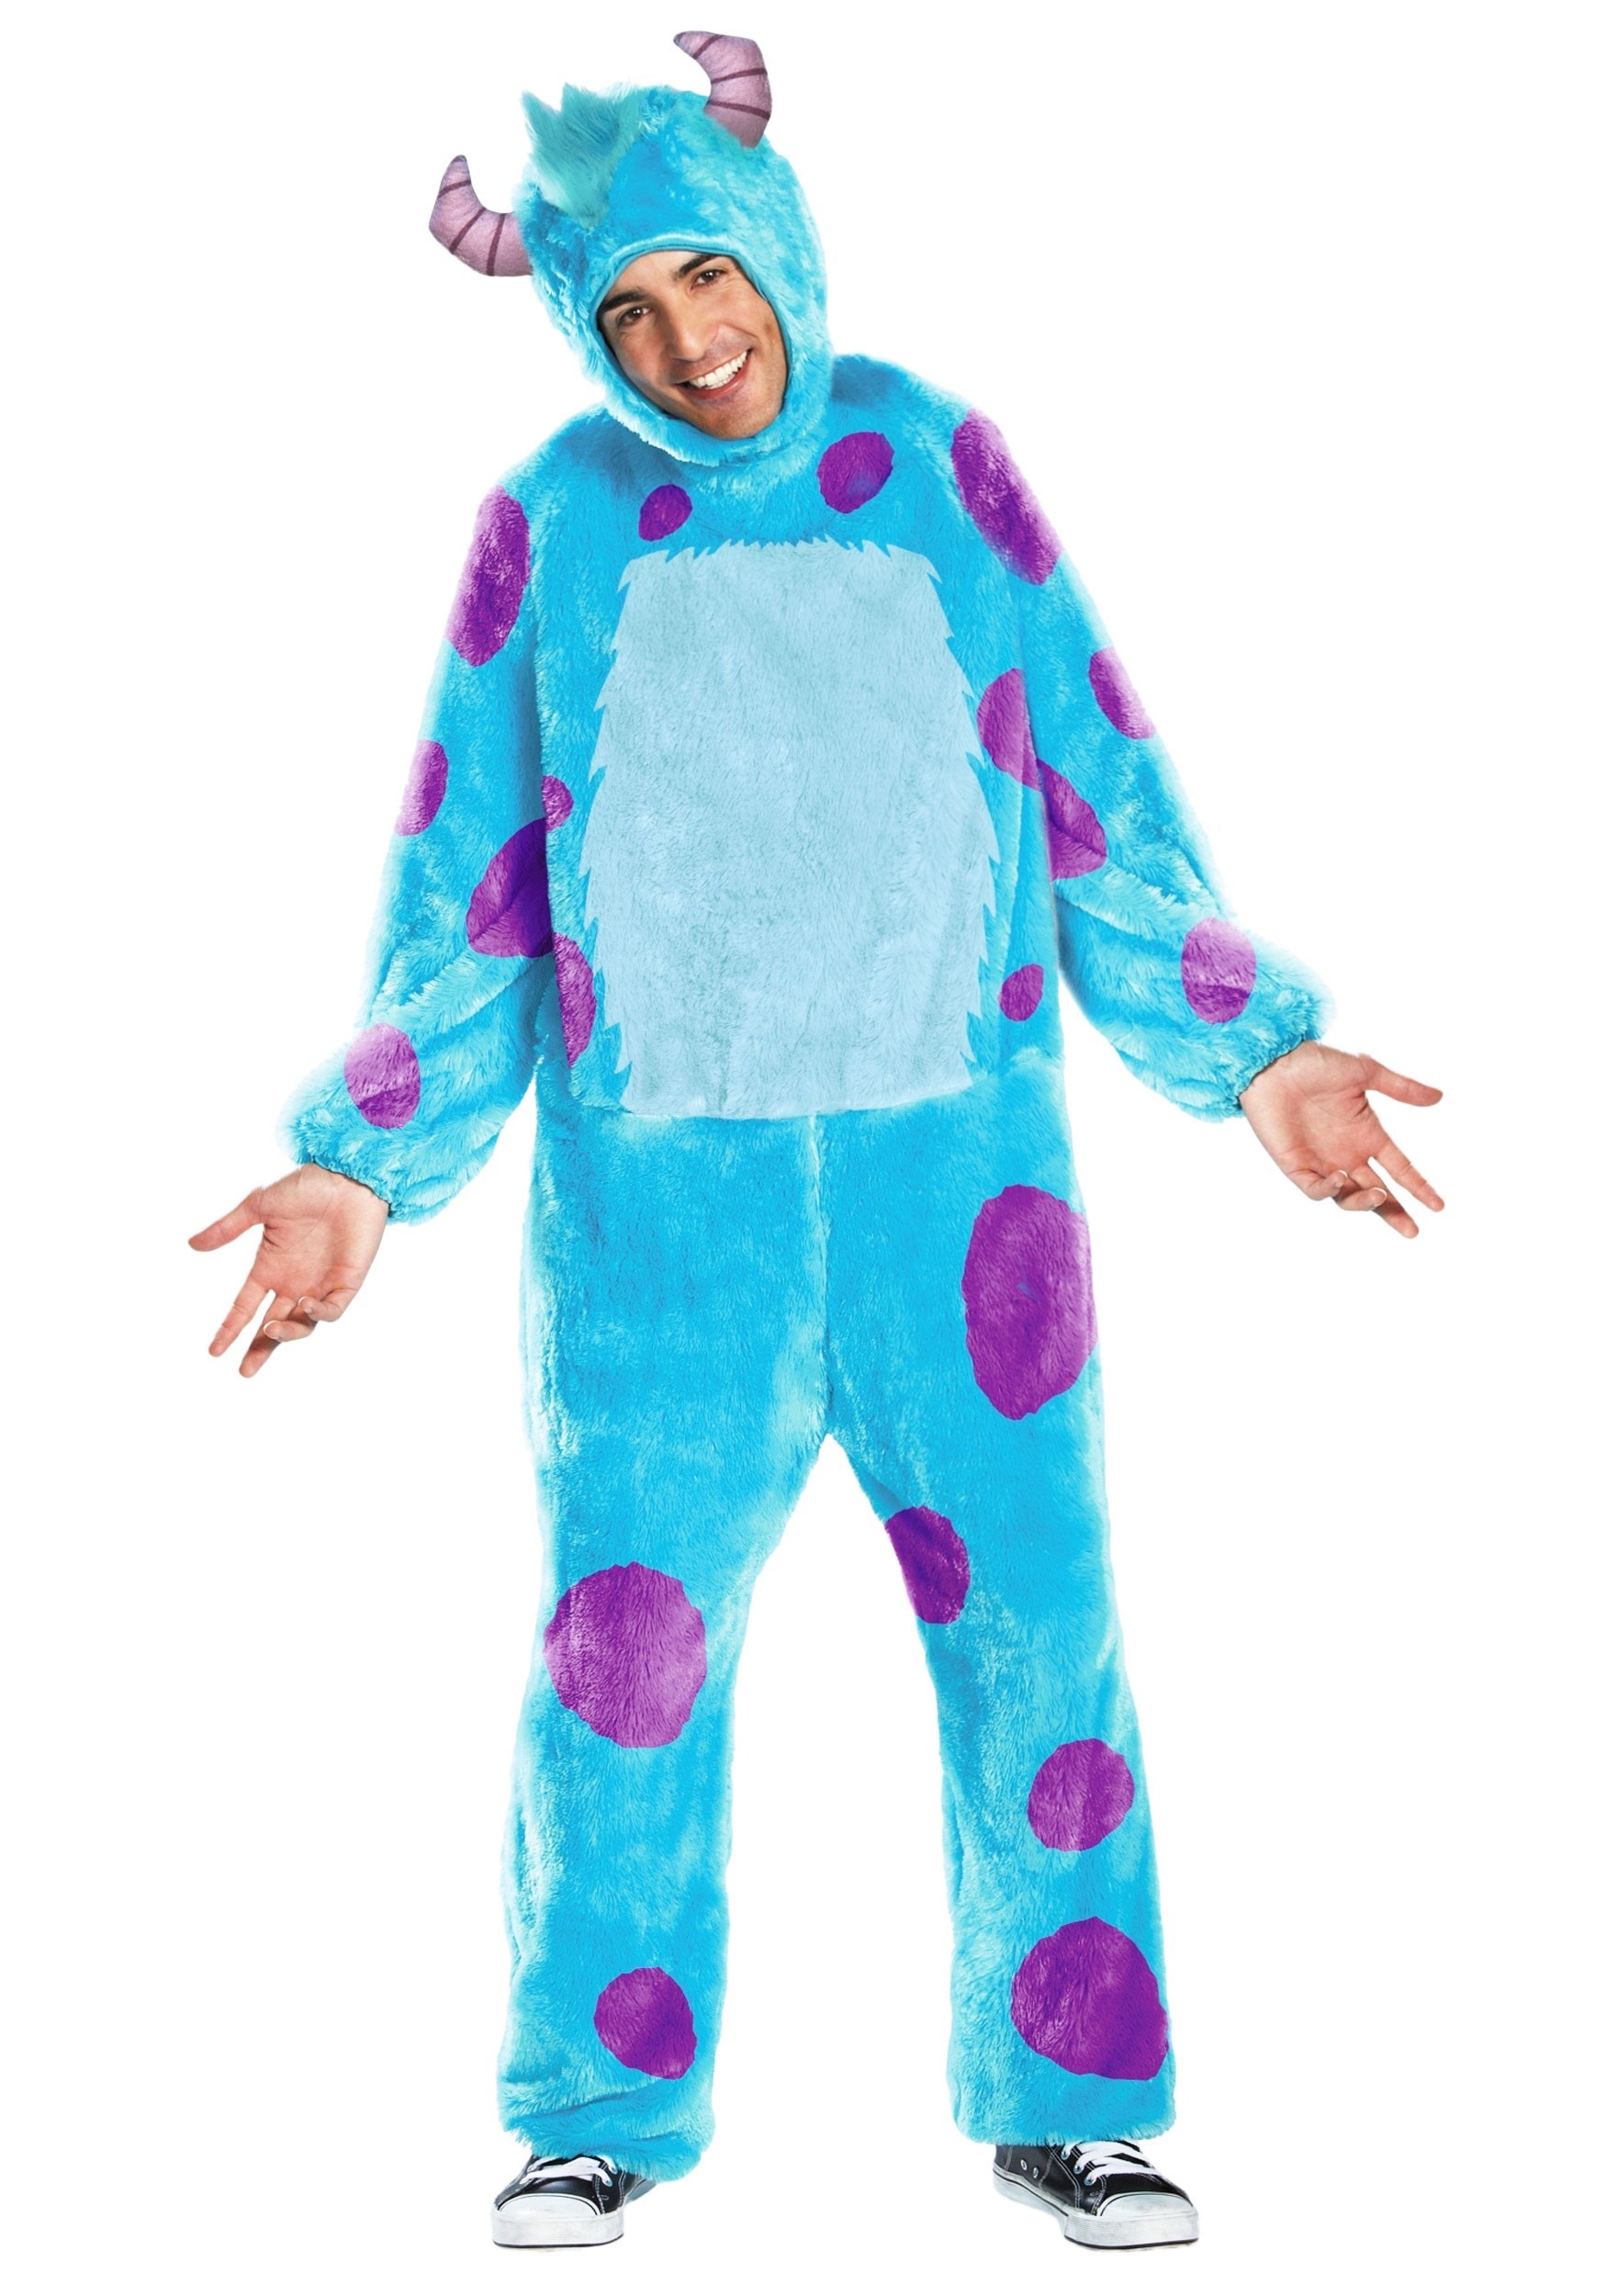 Image of Monsters Inc Sulley Costume for Adults ID DI69322-M